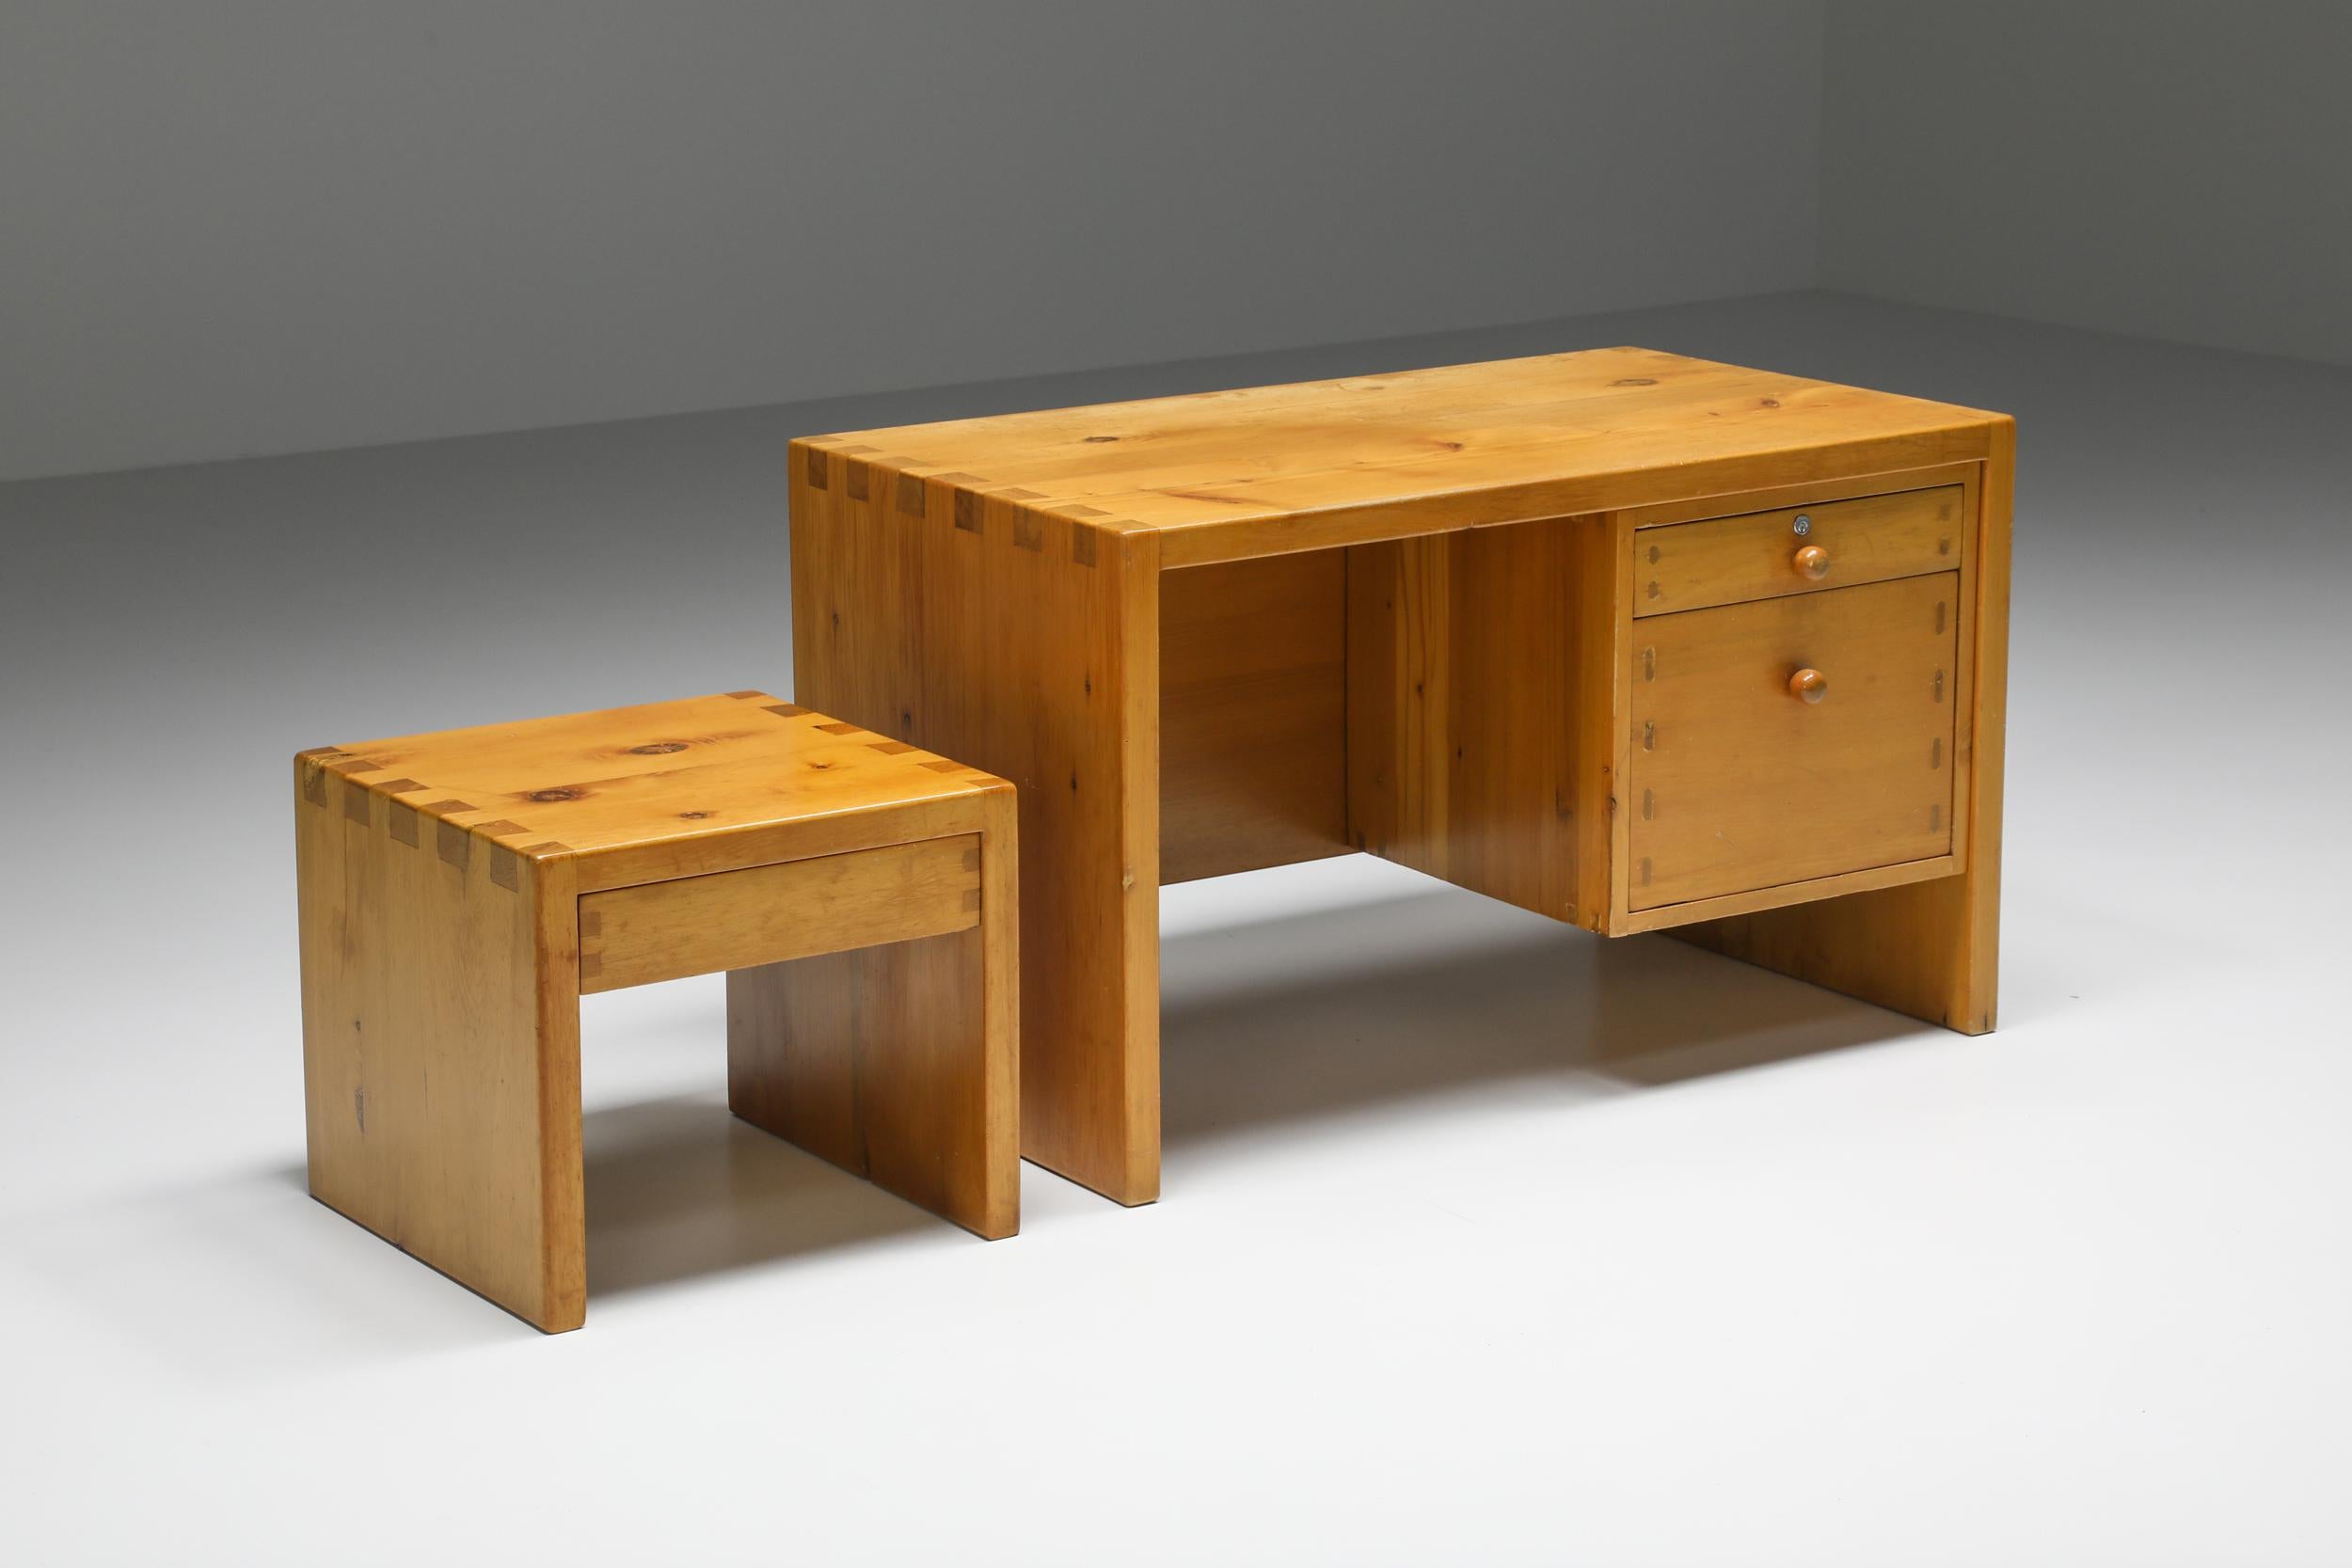  Pierre Chapo Insp. Office Desk with Drawers, French Craftsmanship, 1960's 1